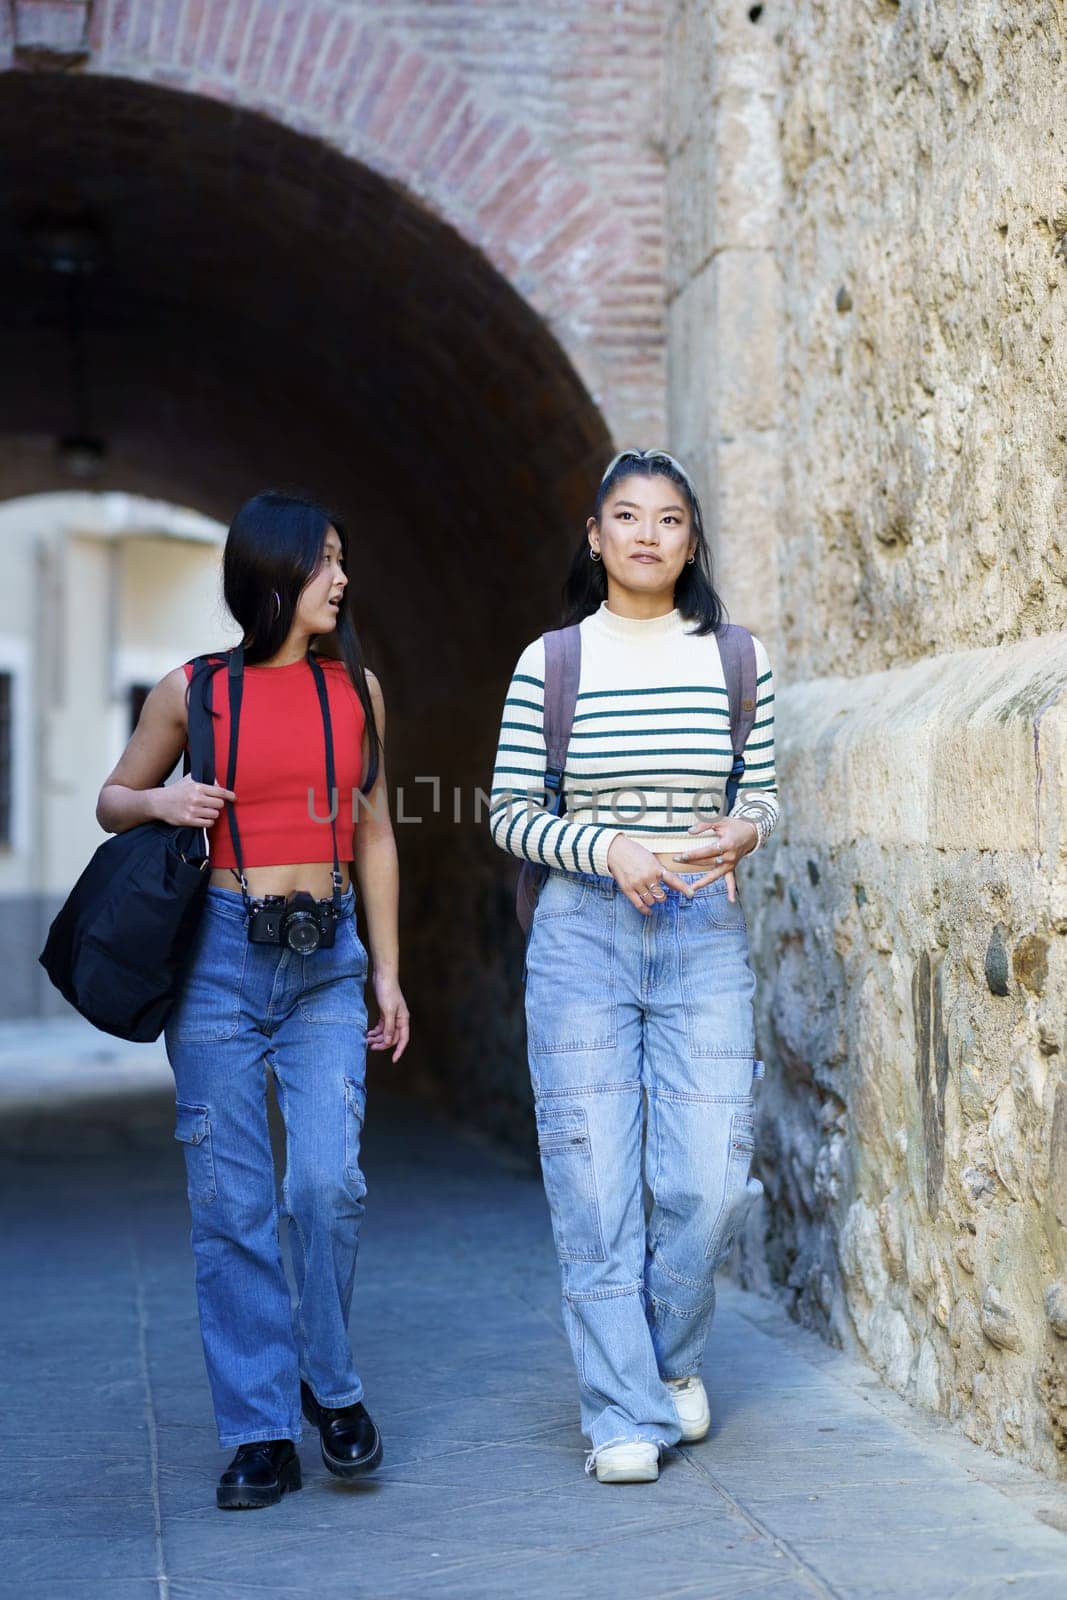 Full body of young Asian women tourists in casual clothes with bags and photo camera strolling against stone wall while talking to each other